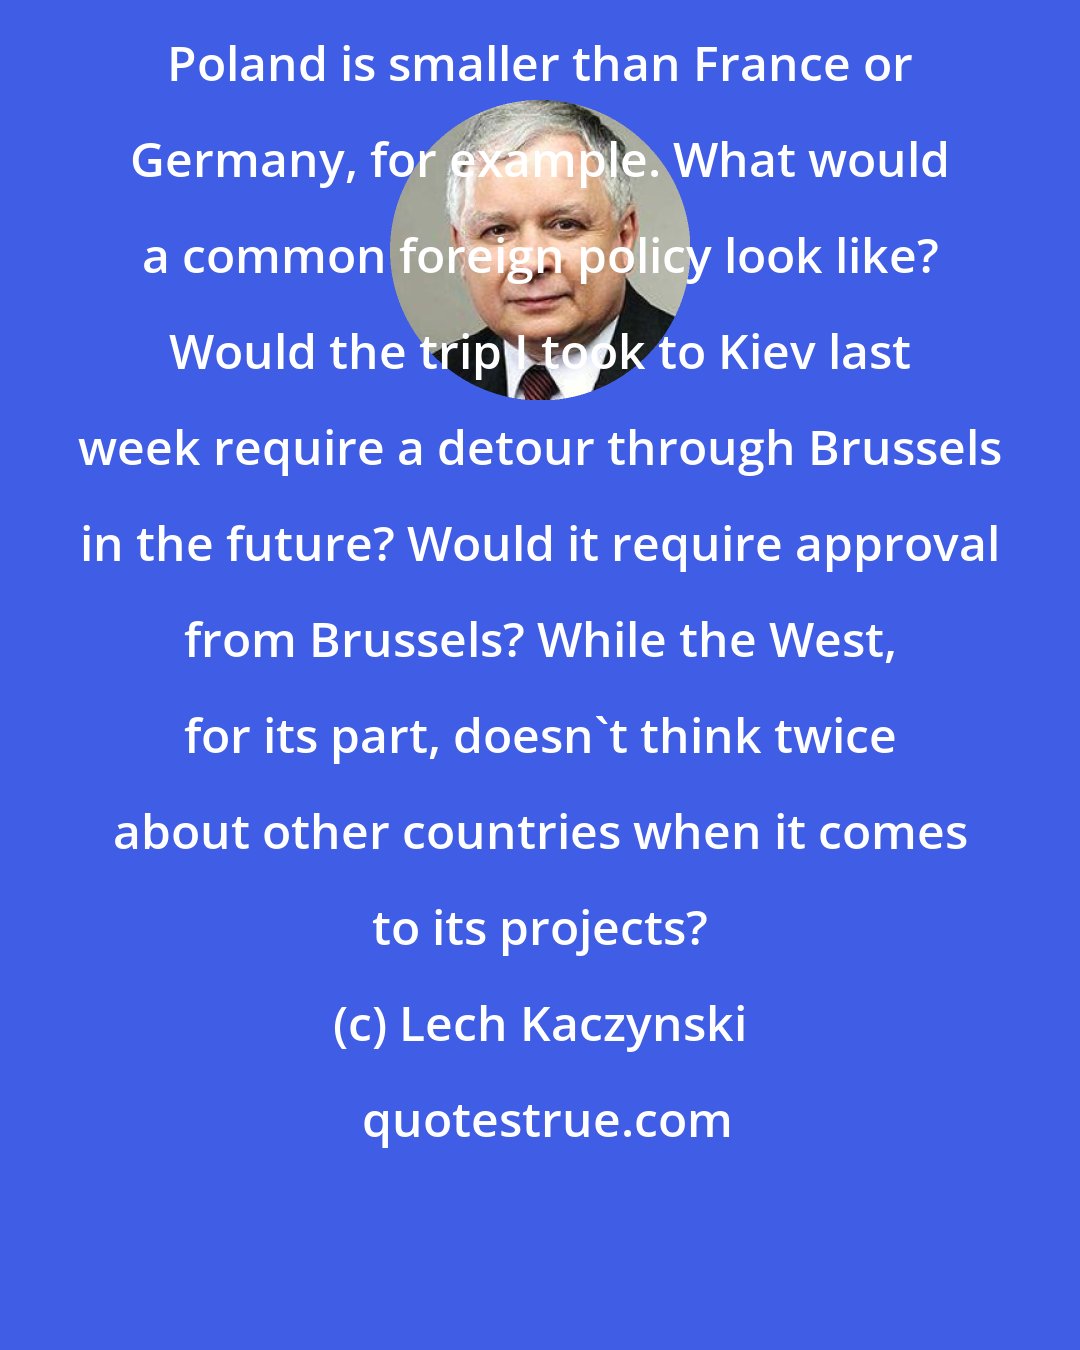 Lech Kaczynski: Poland is smaller than France or Germany, for example. What would a common foreign policy look like? Would the trip I took to Kiev last week require a detour through Brussels in the future? Would it require approval from Brussels? While the West, for its part, doesn't think twice about other countries when it comes to its projects?